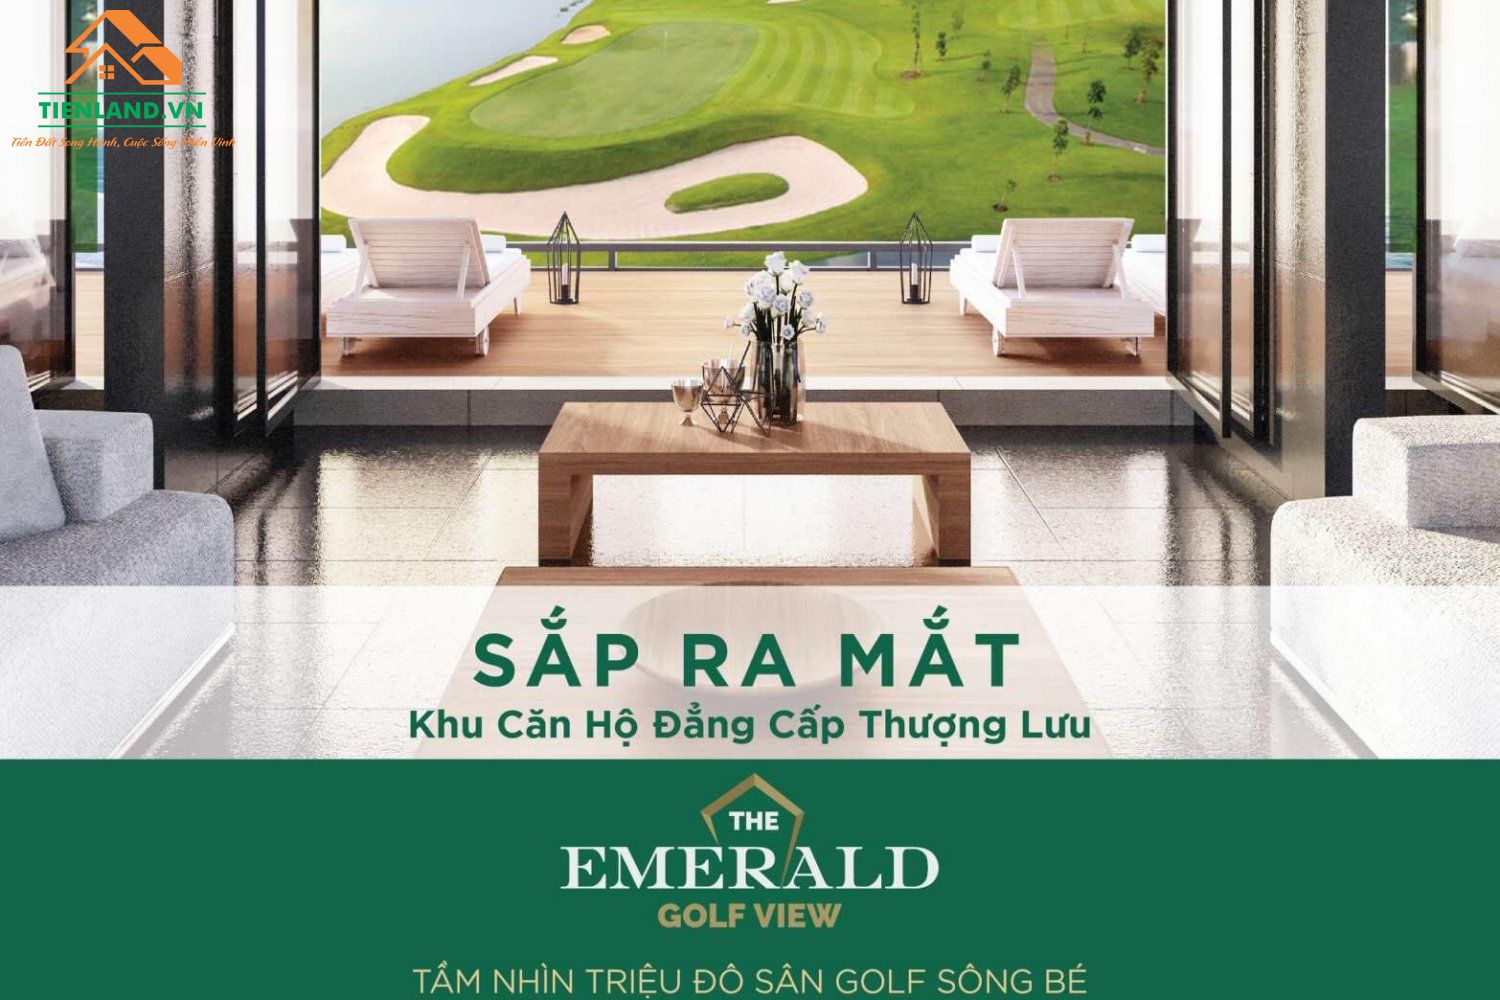 The Emerald Golf View